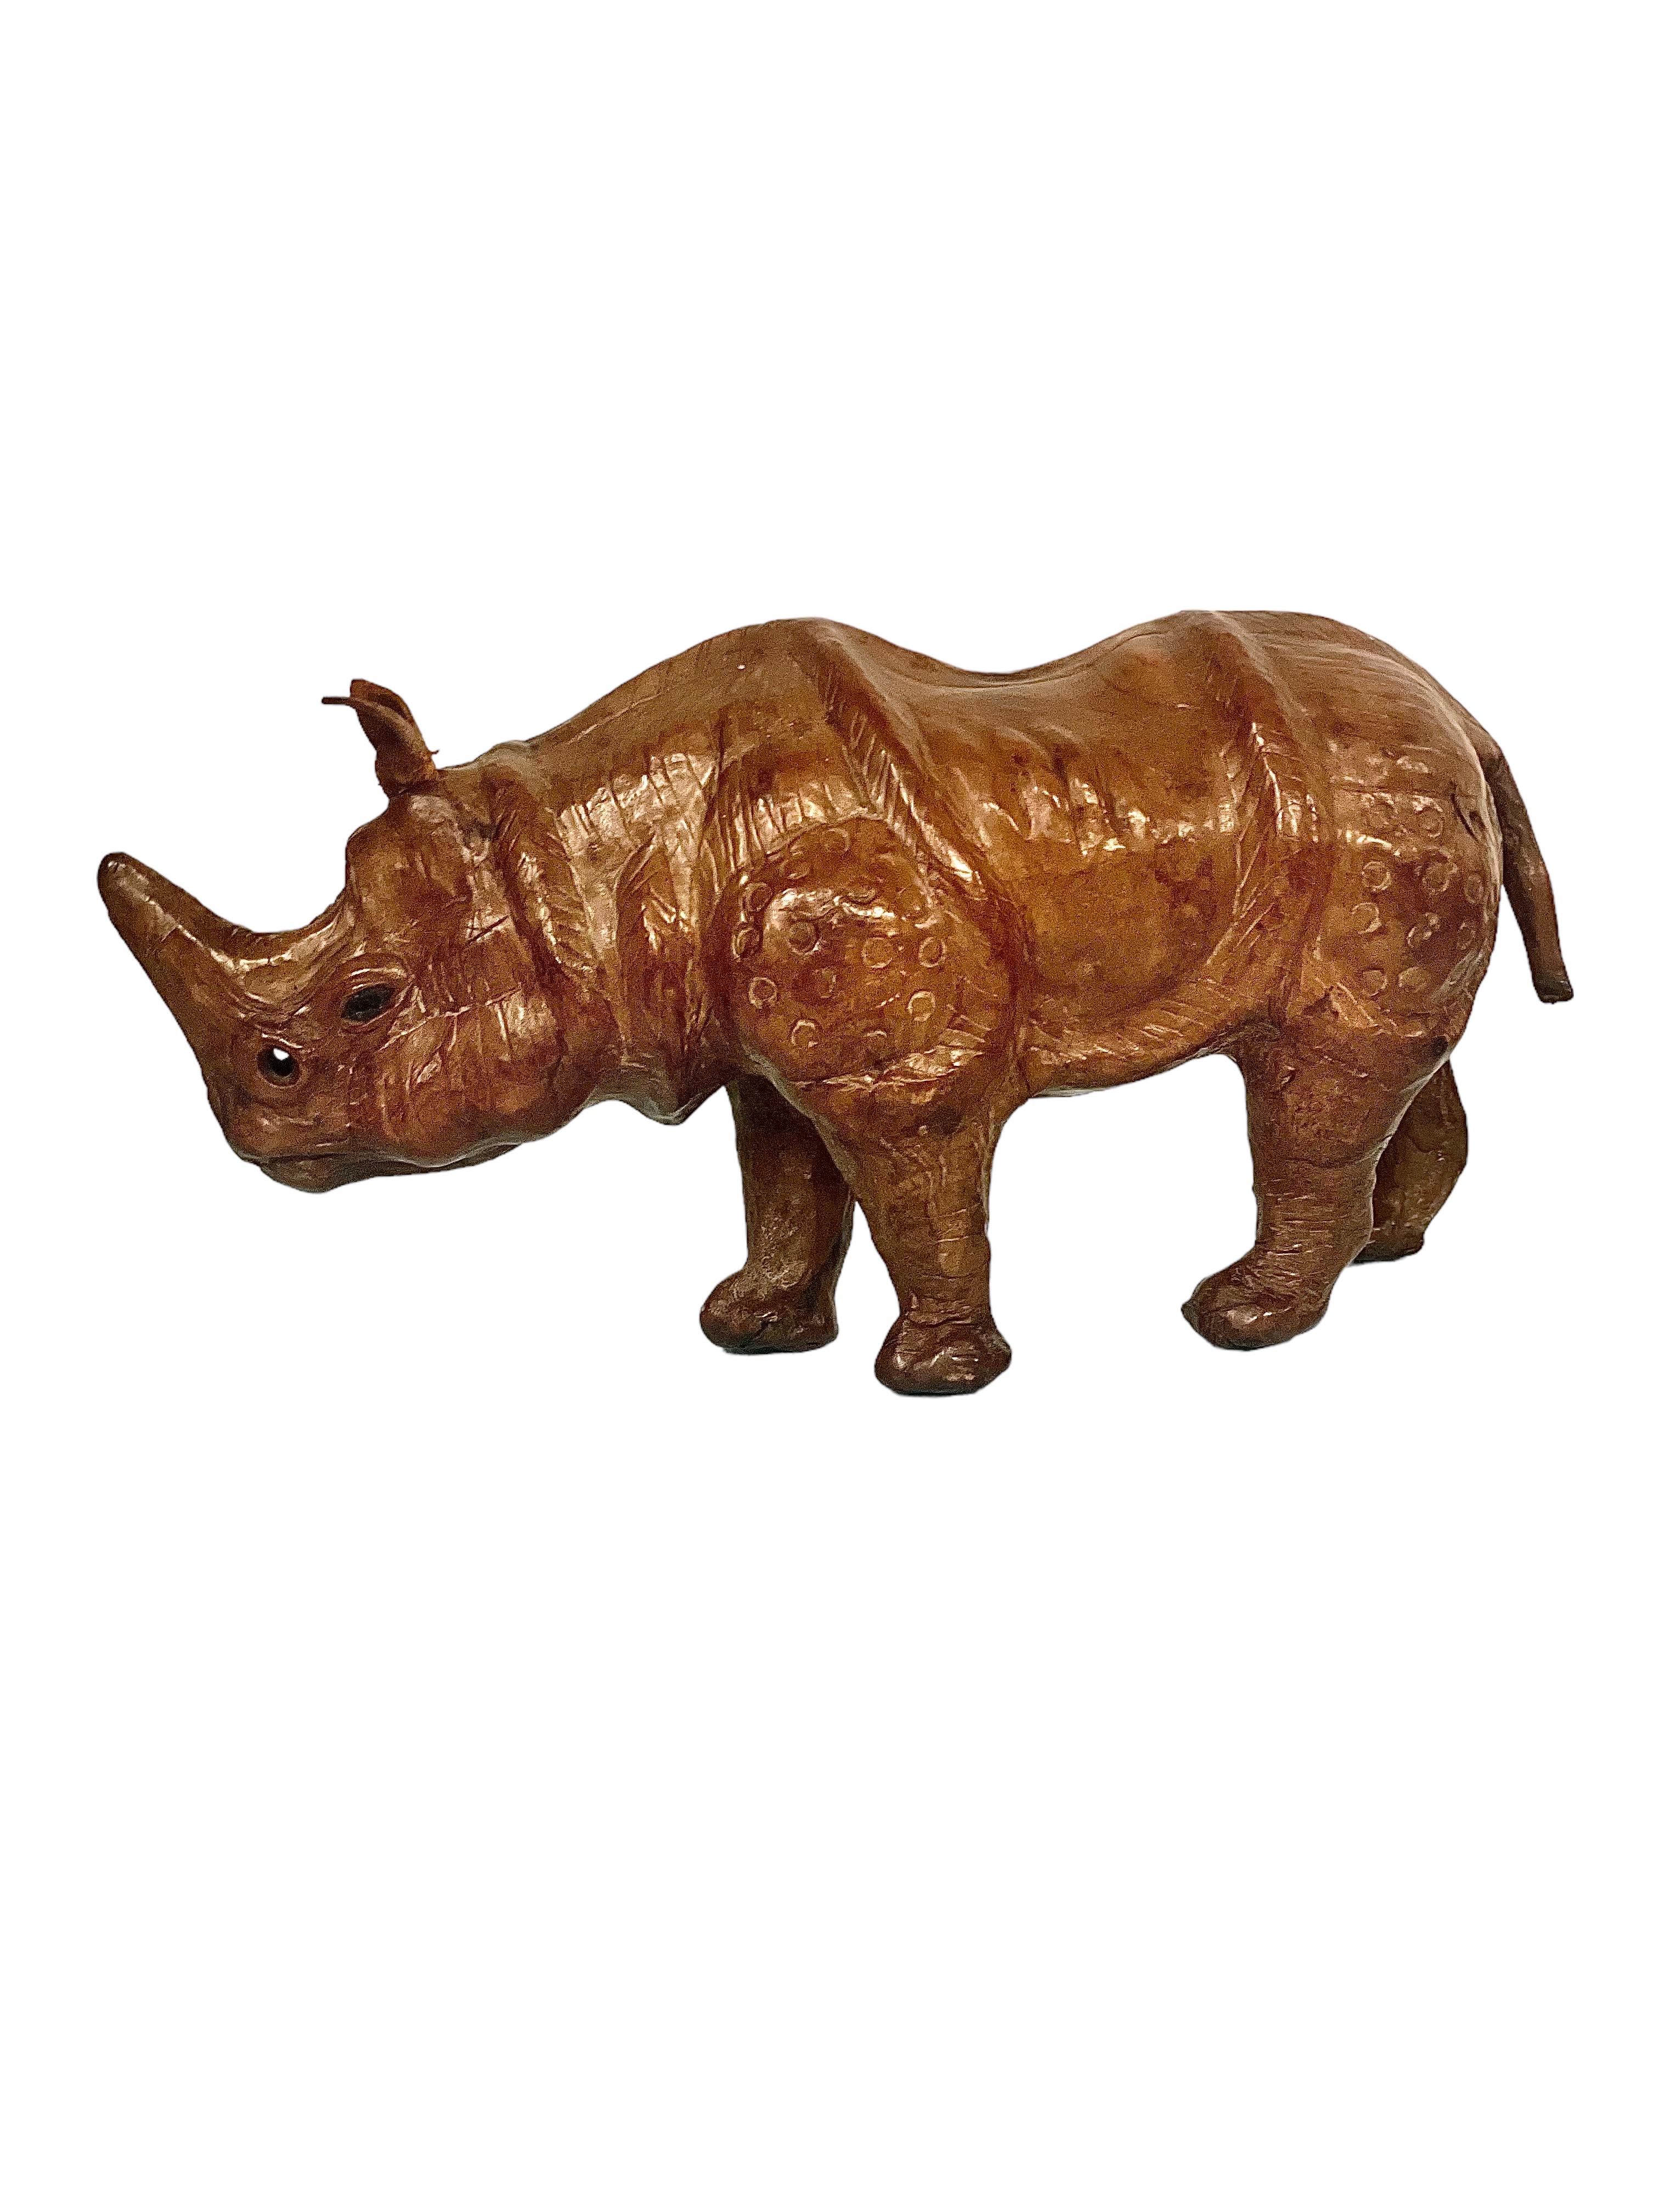 A gorgeous vintage rhinoceros ornament, hand-sculpted and leather-covered, with black glass eyes. Dating from around the 1950s, this majestic little sculpture is full of realistic and artistic detail and authentic character, and would make an